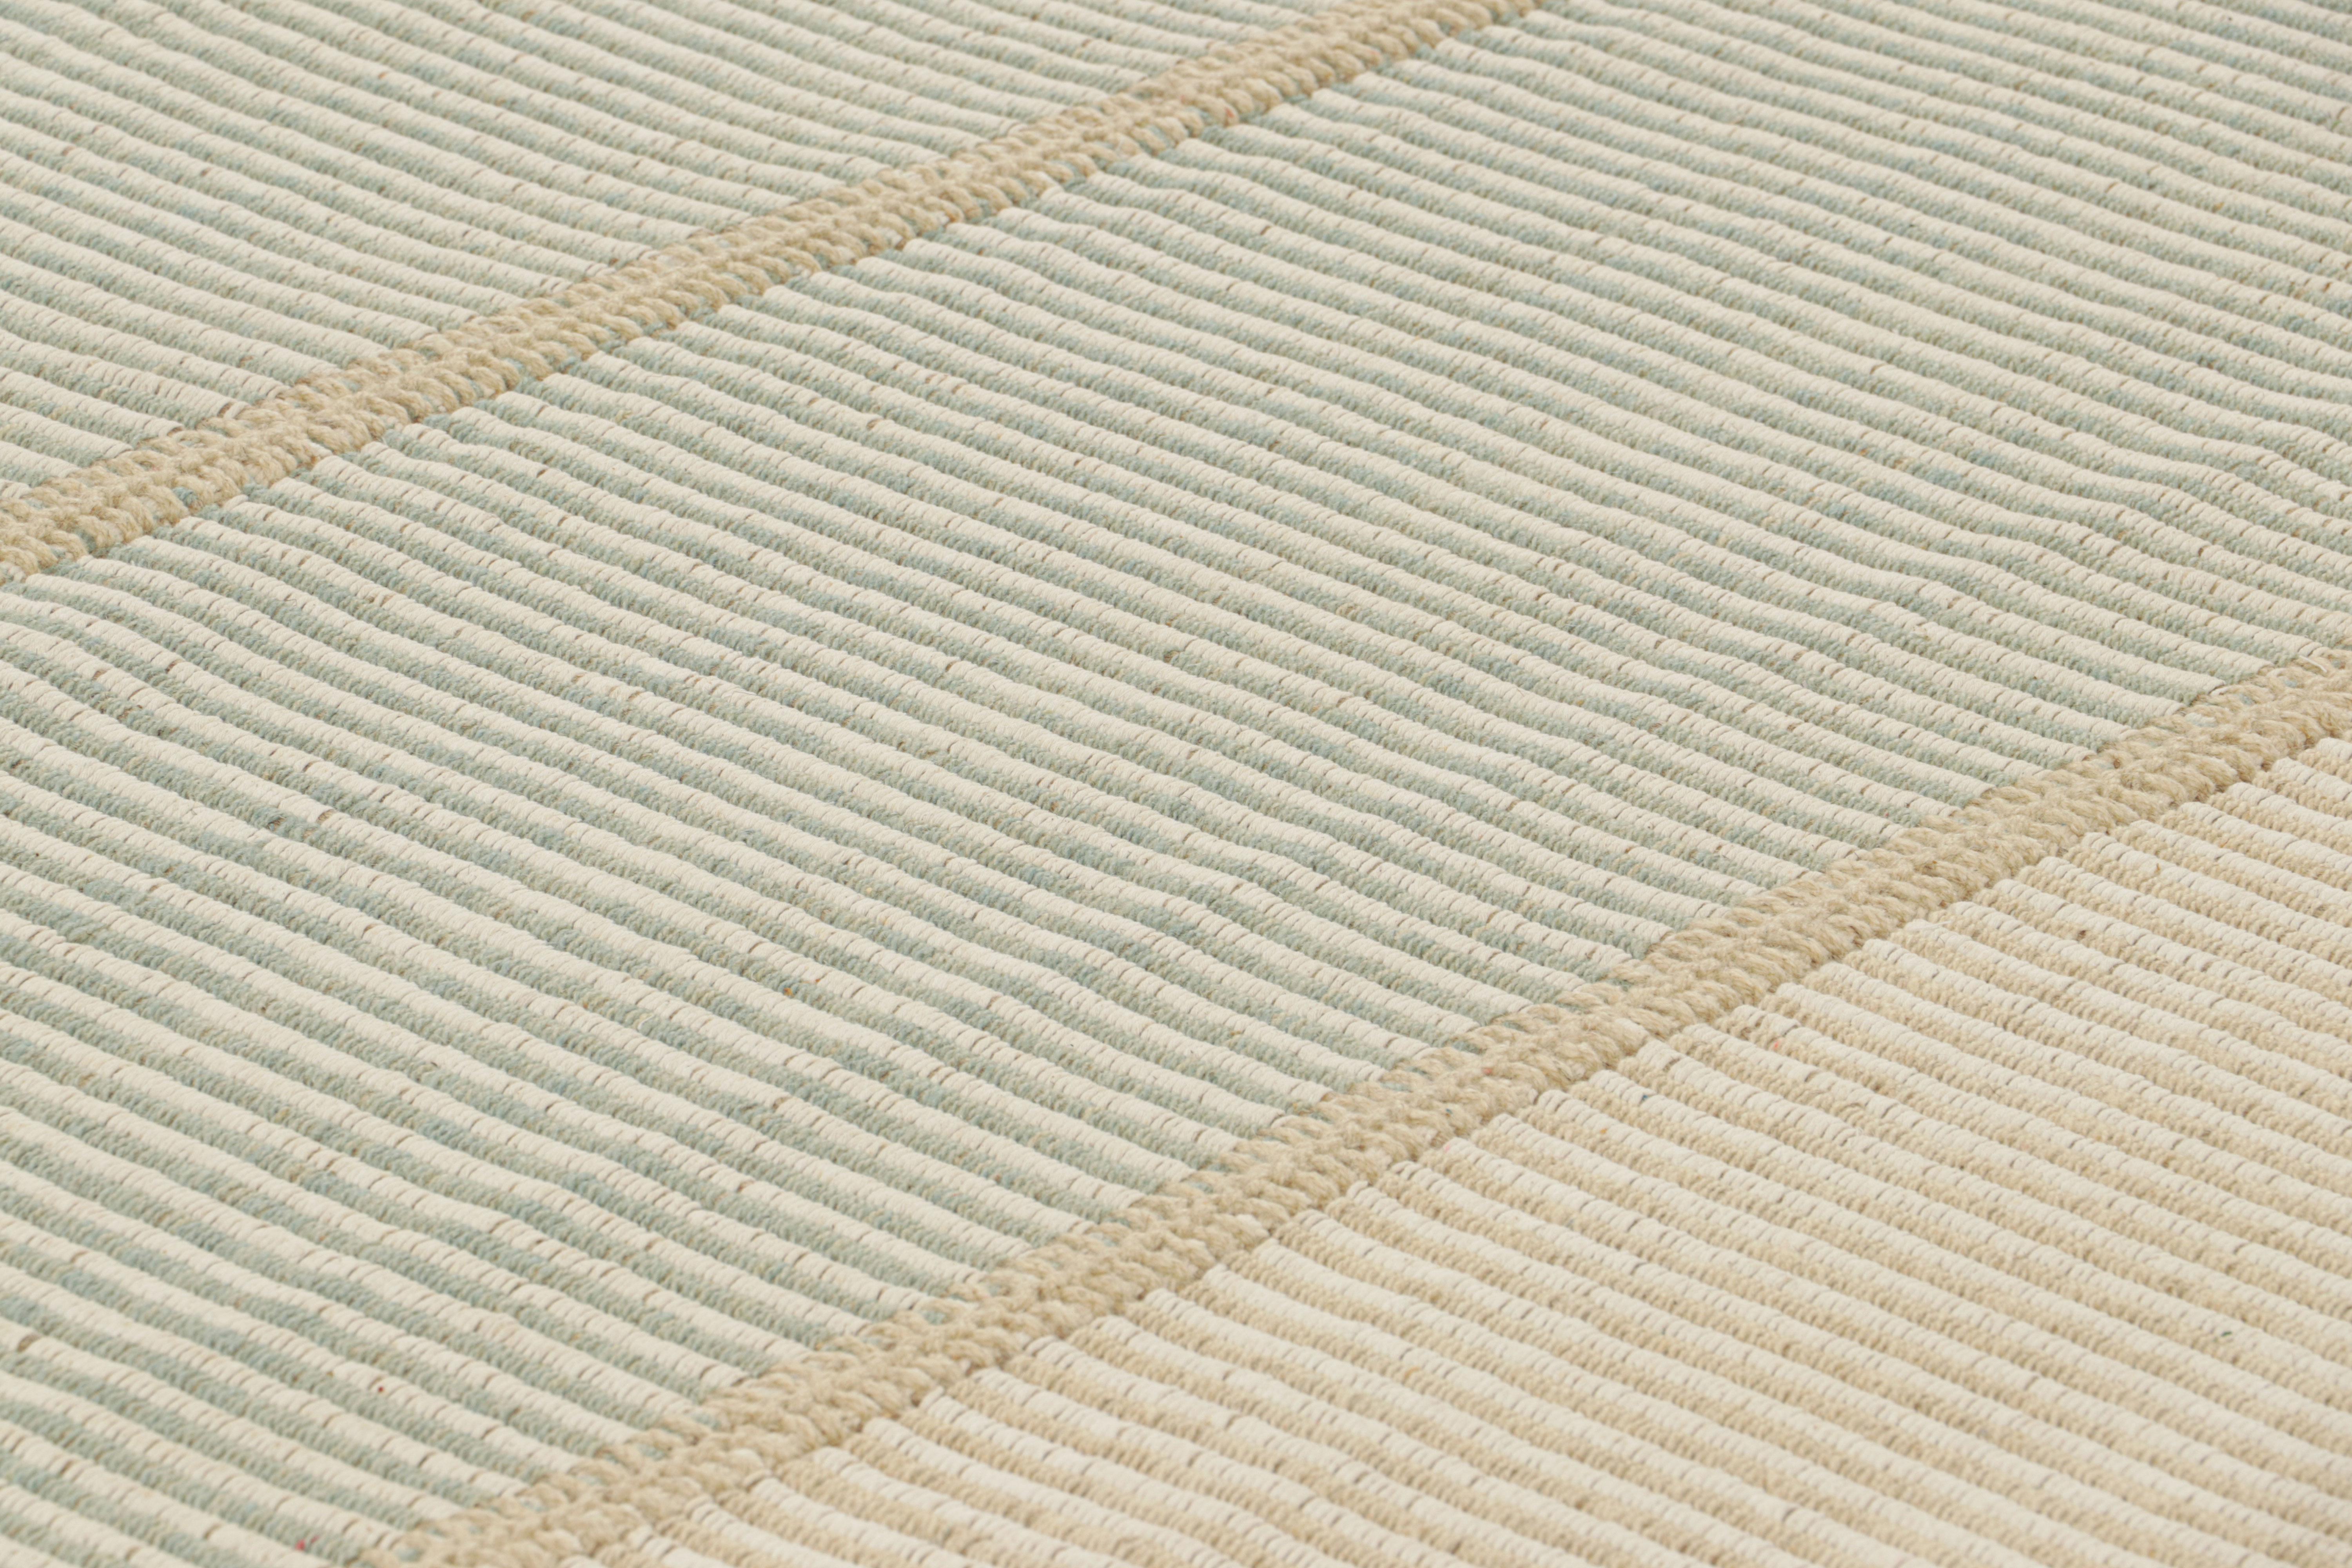 Handwoven in wool, a 9x13 Kilim design from an inventive new contemporary flat weave collection by Rug & Kilim.

On the Design: 

Fondly dubbed, “Rez Kilims”, this modern take on classic panel-weaving enjoys a fabulous, unique play of beige and blue